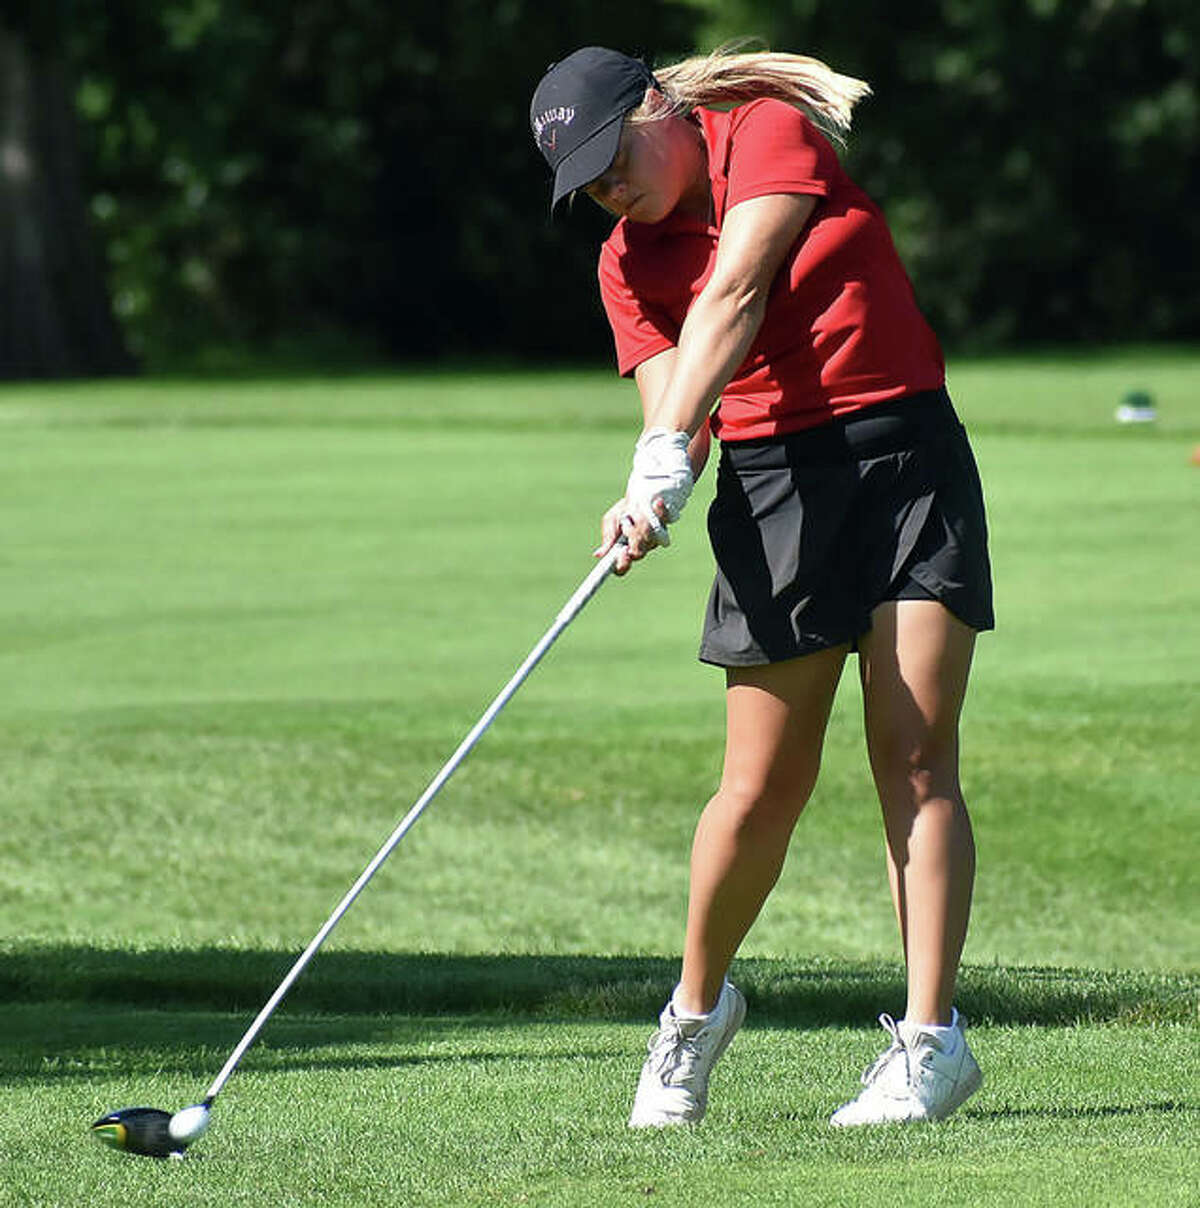 Godfrey’s Audrey Cain, an incoming junior at Marquette Catholic, hits her drive at hole No. 12 Tuesday in the Illinois State Junior Girls Championship at Hickory Point Golf Course in Forsyth. Cain shot 86 and is tied for 60th place after day one of the two-day tourney.